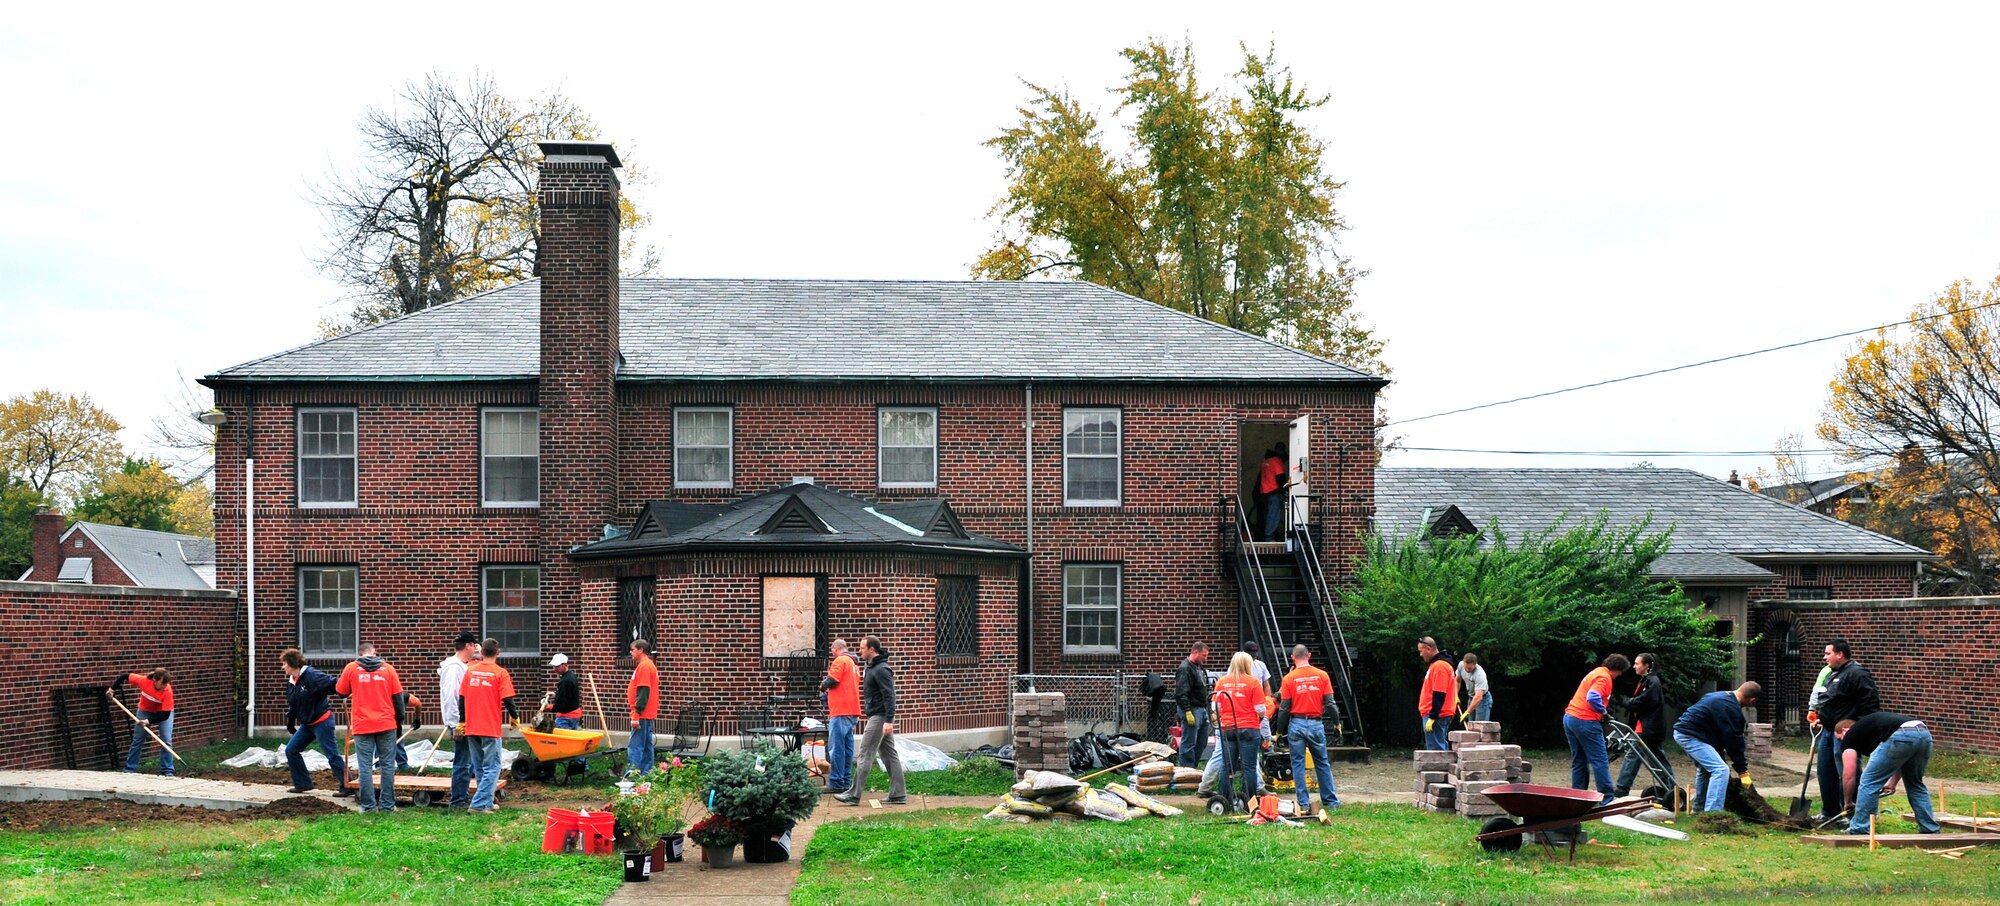 Scott Air Force base and community volunteers construct a patio area and new landscaping in the back yard of a donated house Oct 27 during the Celebration of Service campaign event in Saint Louis, Mo. The volunteers rehabilitated a donated church building into a technology training and resource center for veterans allowing them a place to transition from military into civilian life.  The new facility will provide veterans with instruction and skills training to preparing them for employment The campaign launched by Home Depot and the Mission Continues, was created to enhance the lives of U.S. military veterans and to highlight the needs and opportunities they face.  (U.S. Air Force photo/ Staff Sgt. Stephenie Wade)